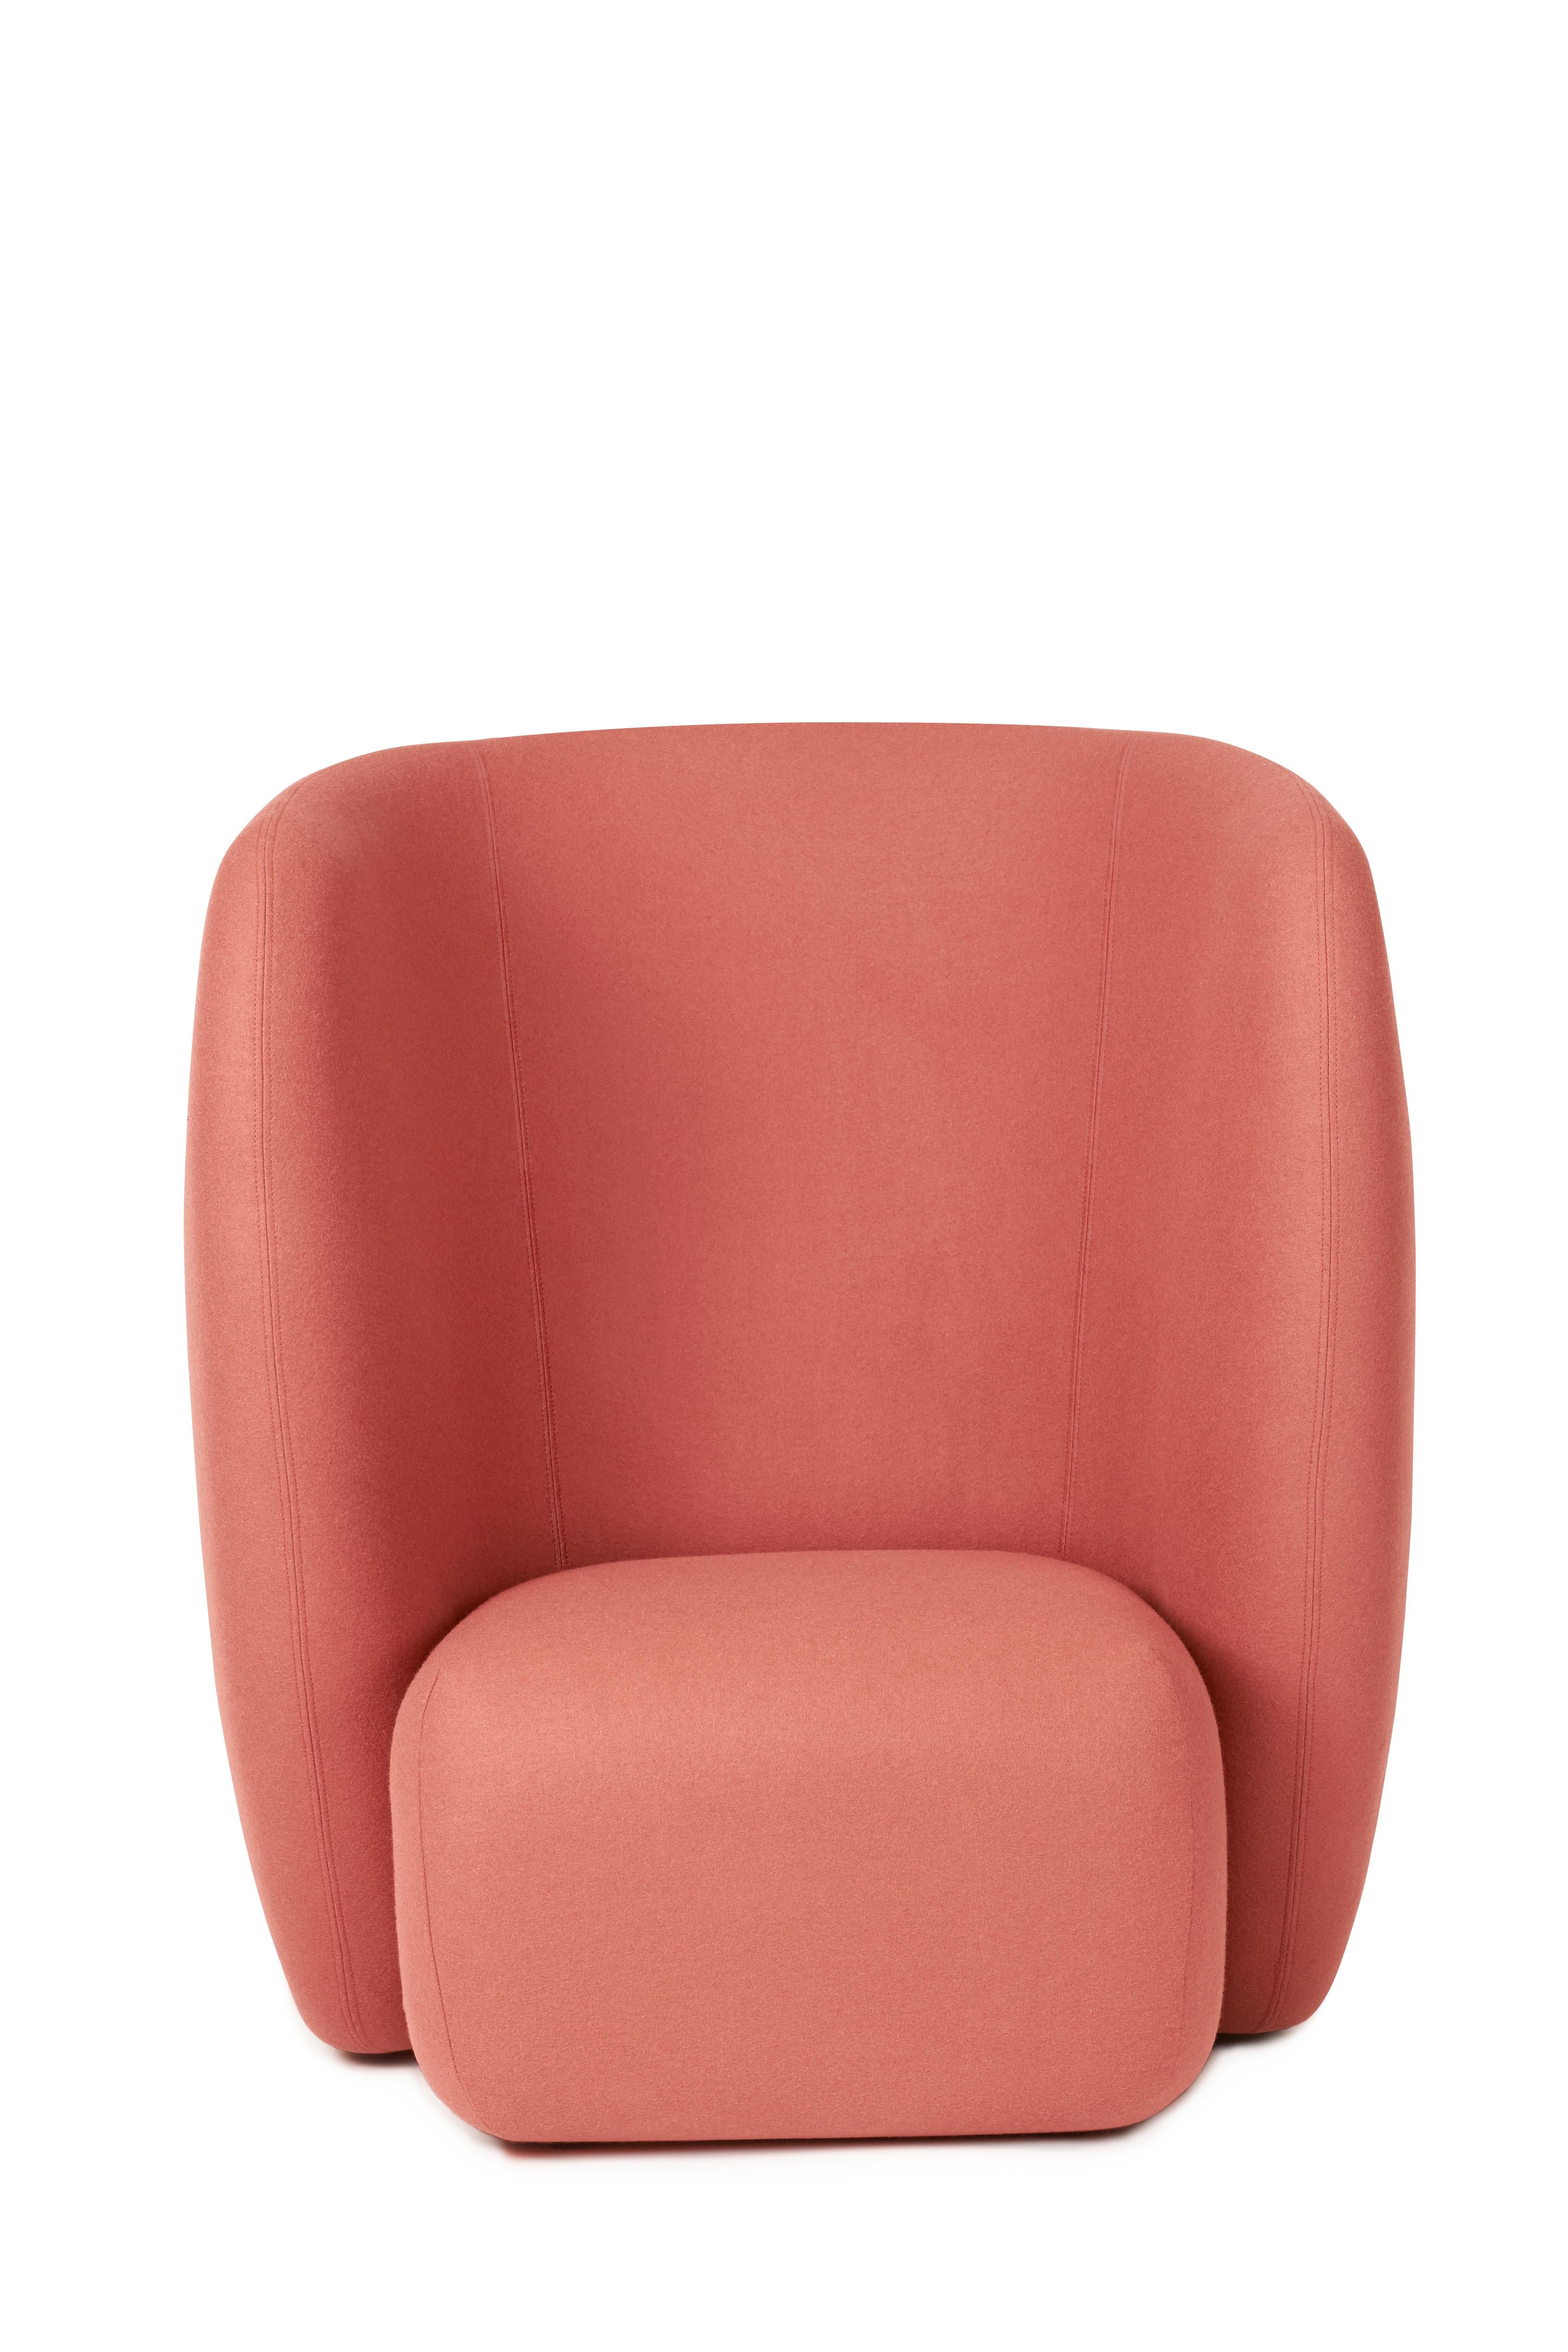 For Sale: Pink (Hero 541) Haven Lounge Chair, by Charlotte Høncke from Warm Nordic